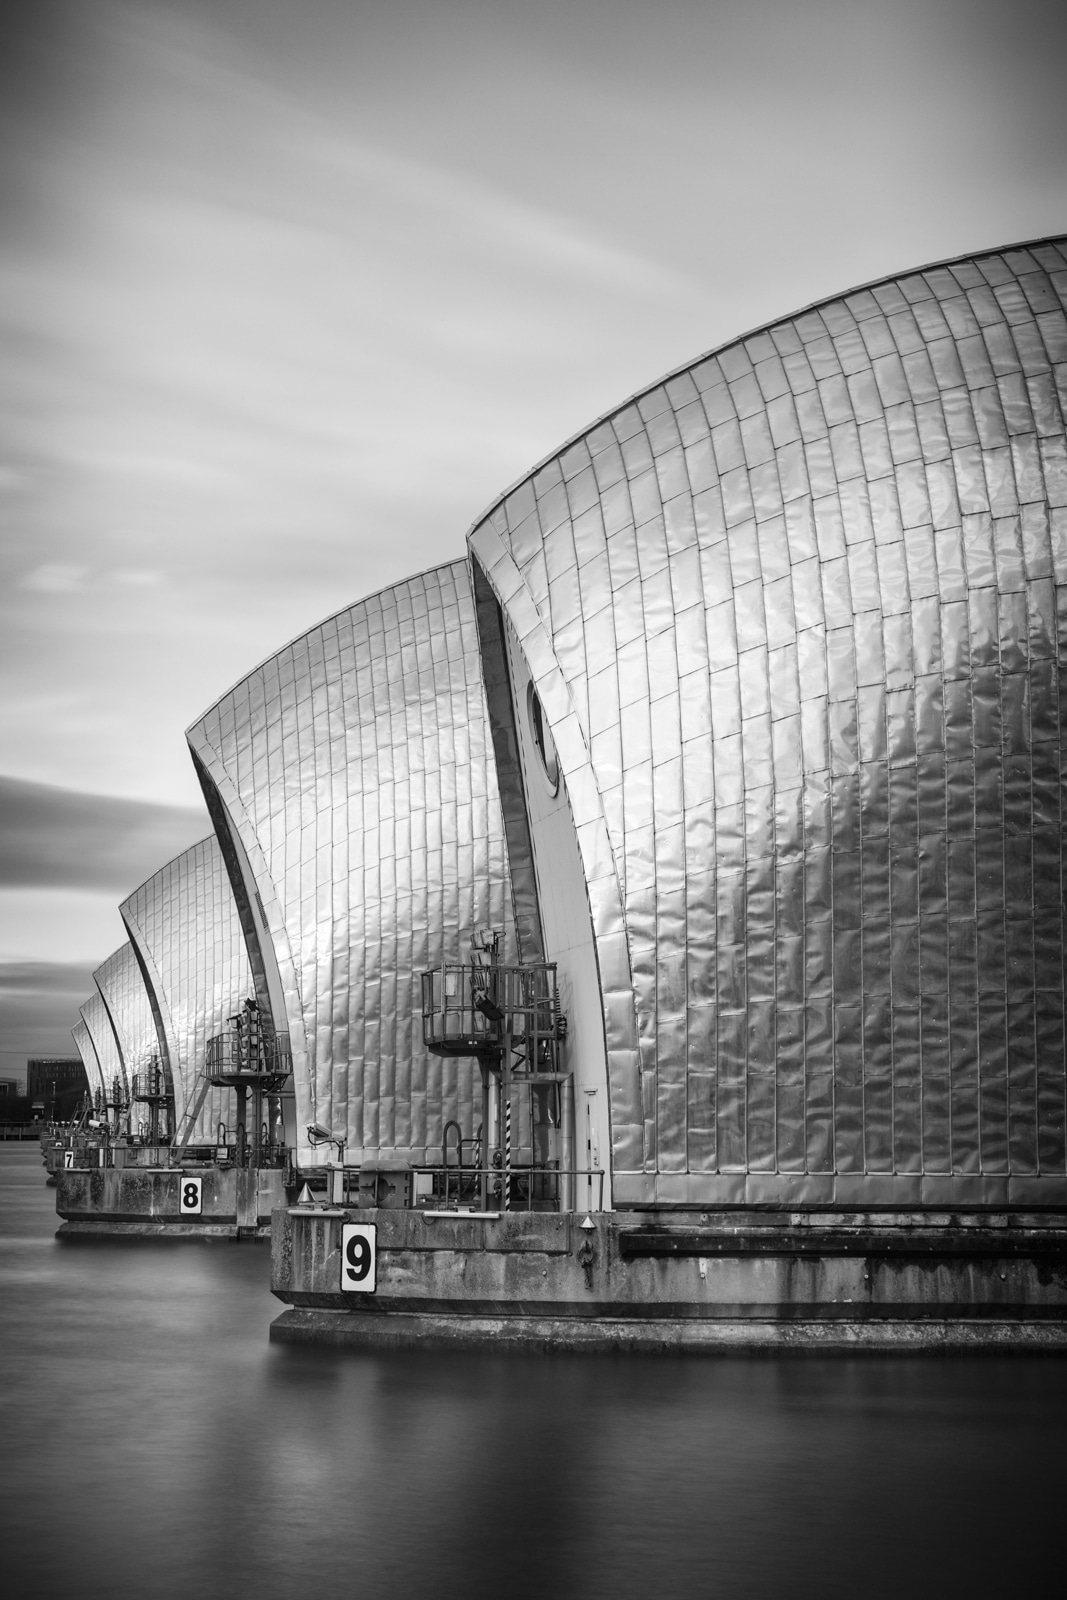 rich clark, thames barrier, abstract, rich clark images, landscape photography